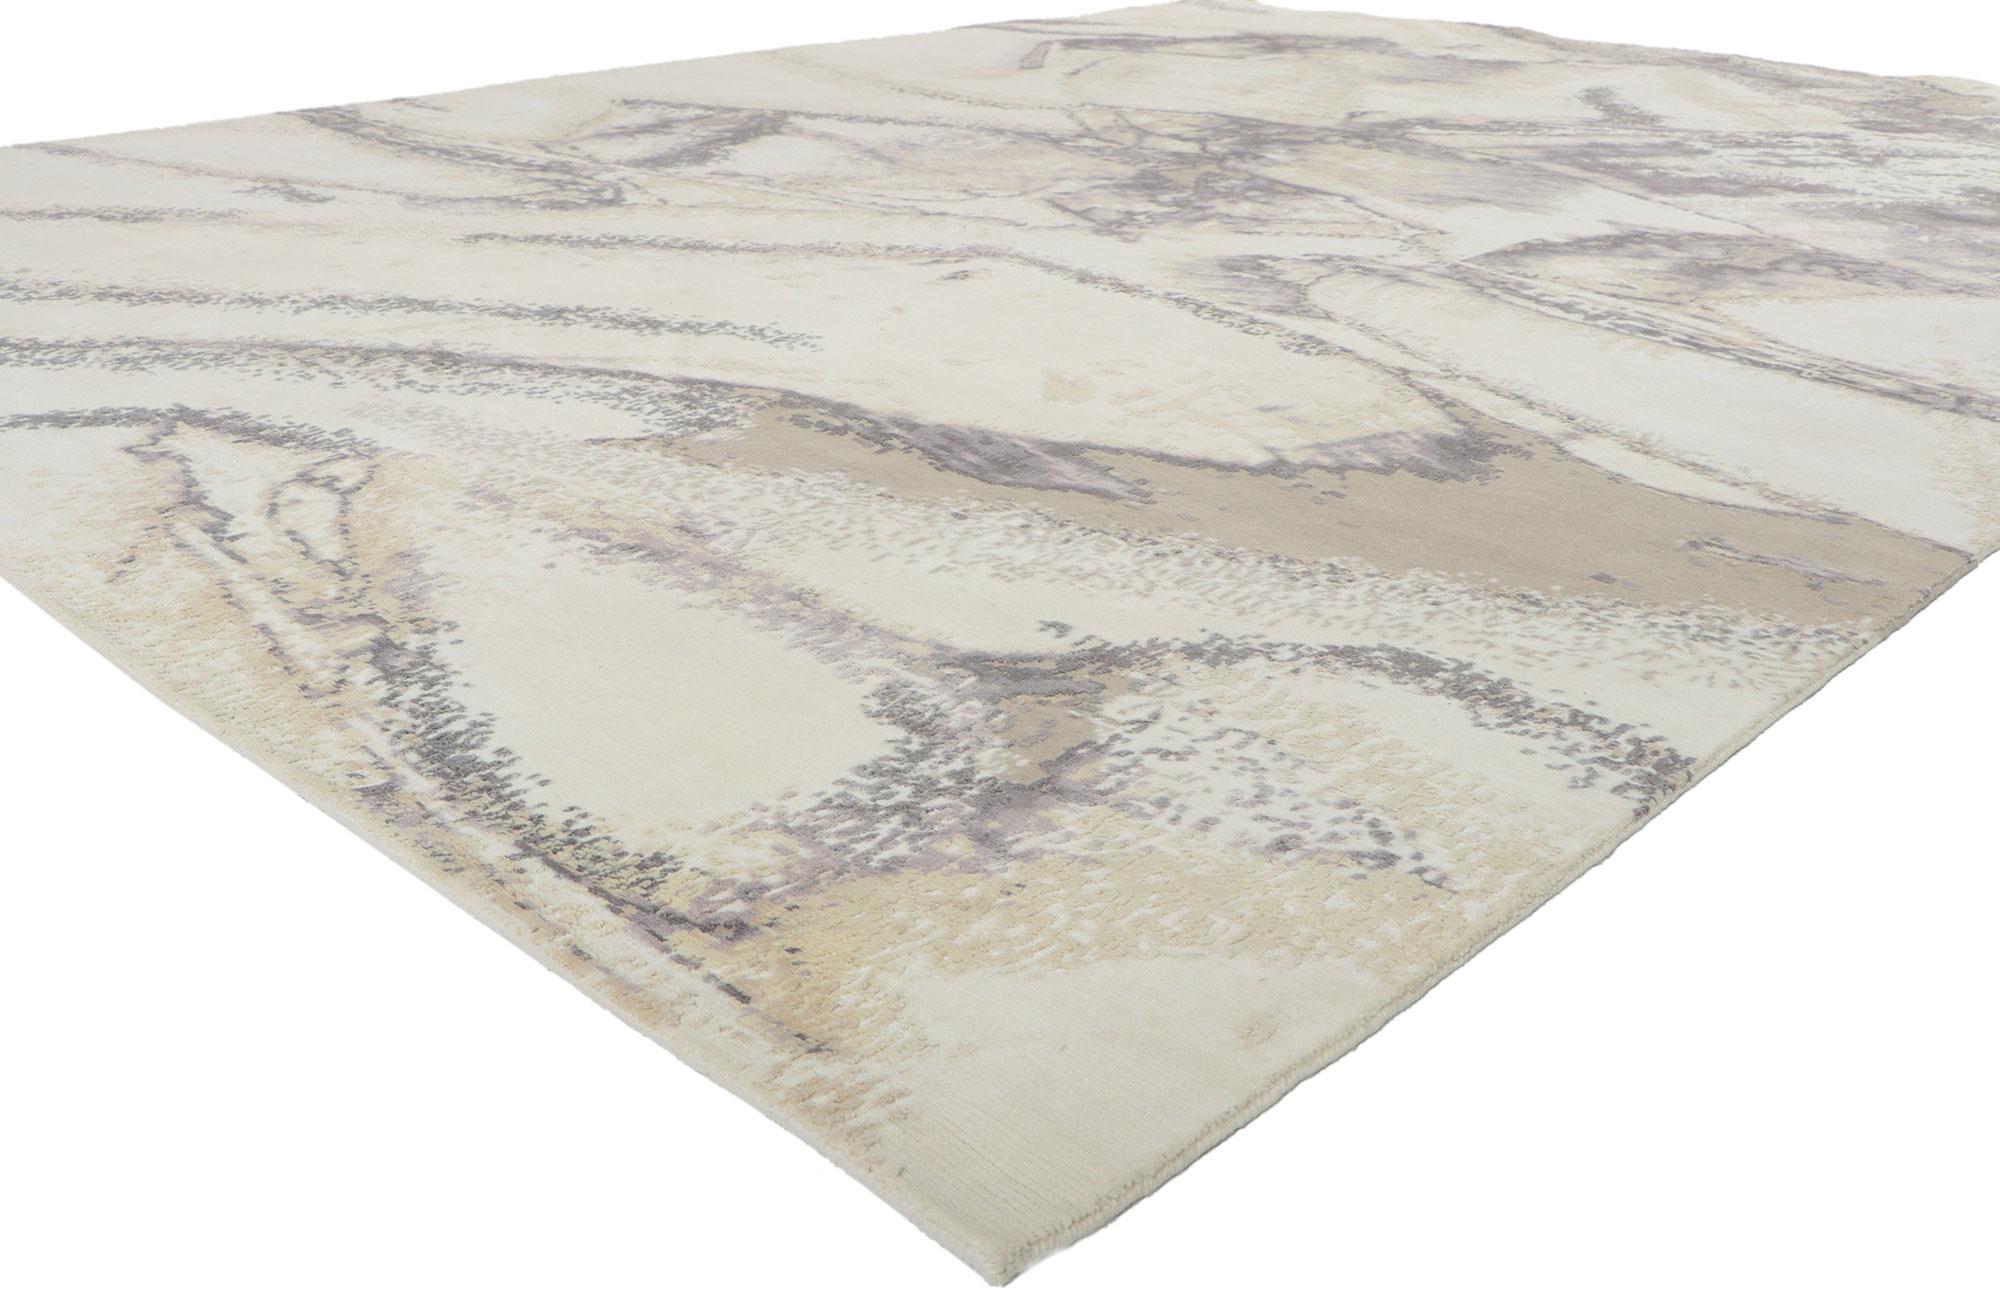 30870 New Contemporary Abstract rug inspired by Gerhard Richter and Biophilic Design, 09'01 x 12'00. Showcasing a modern style and raised silk design with incredible detail and texture, this hand knotted contemporary textured rug is a captivating